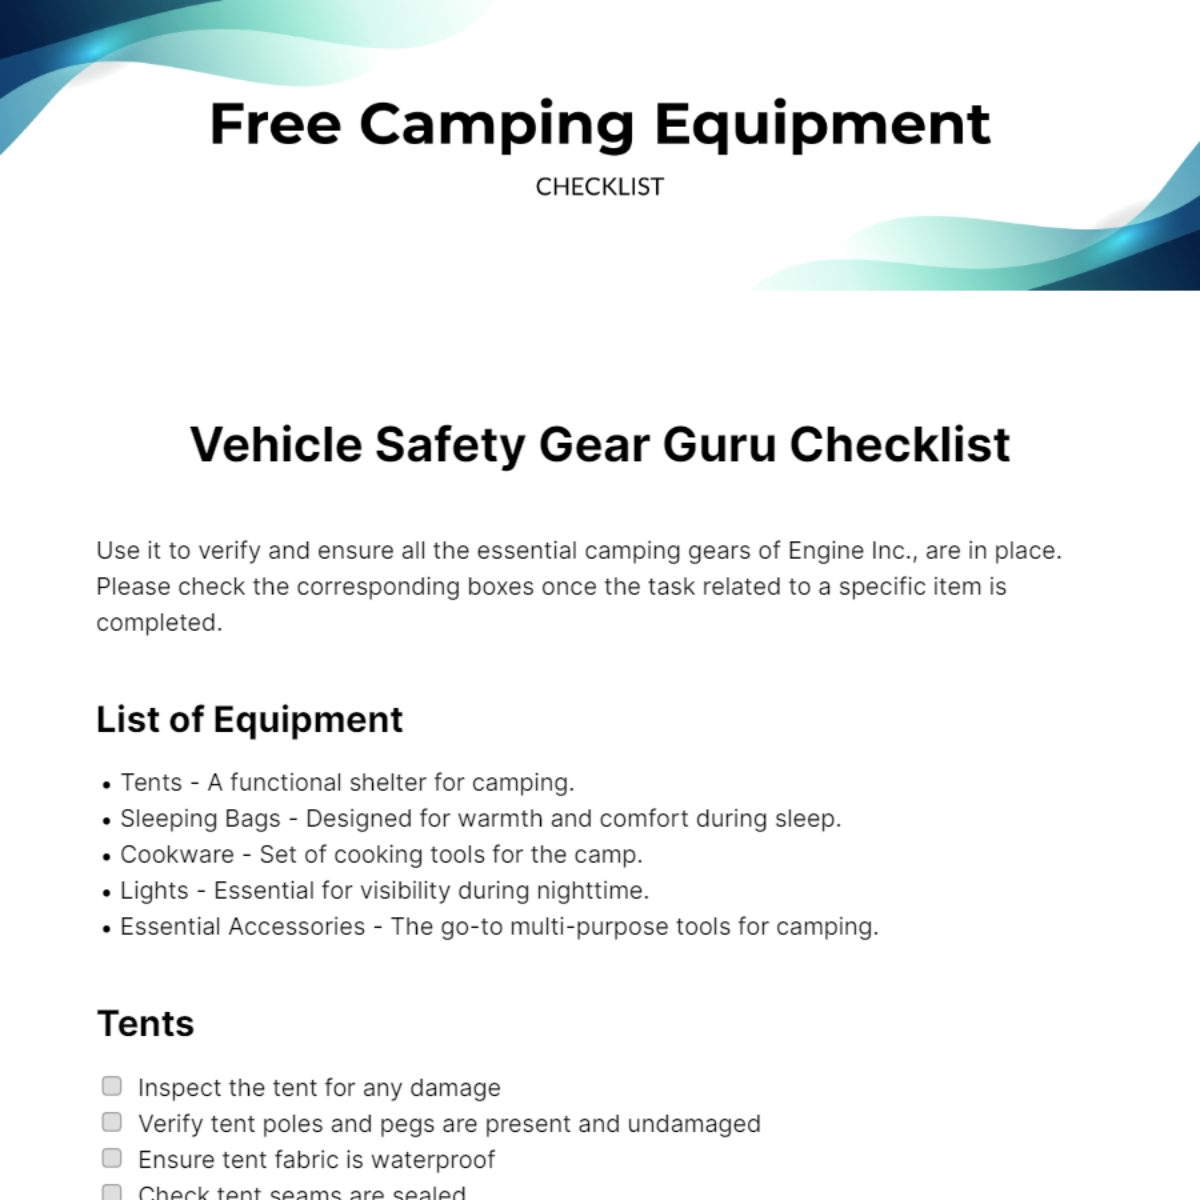 Camping Equipment Checklist Template